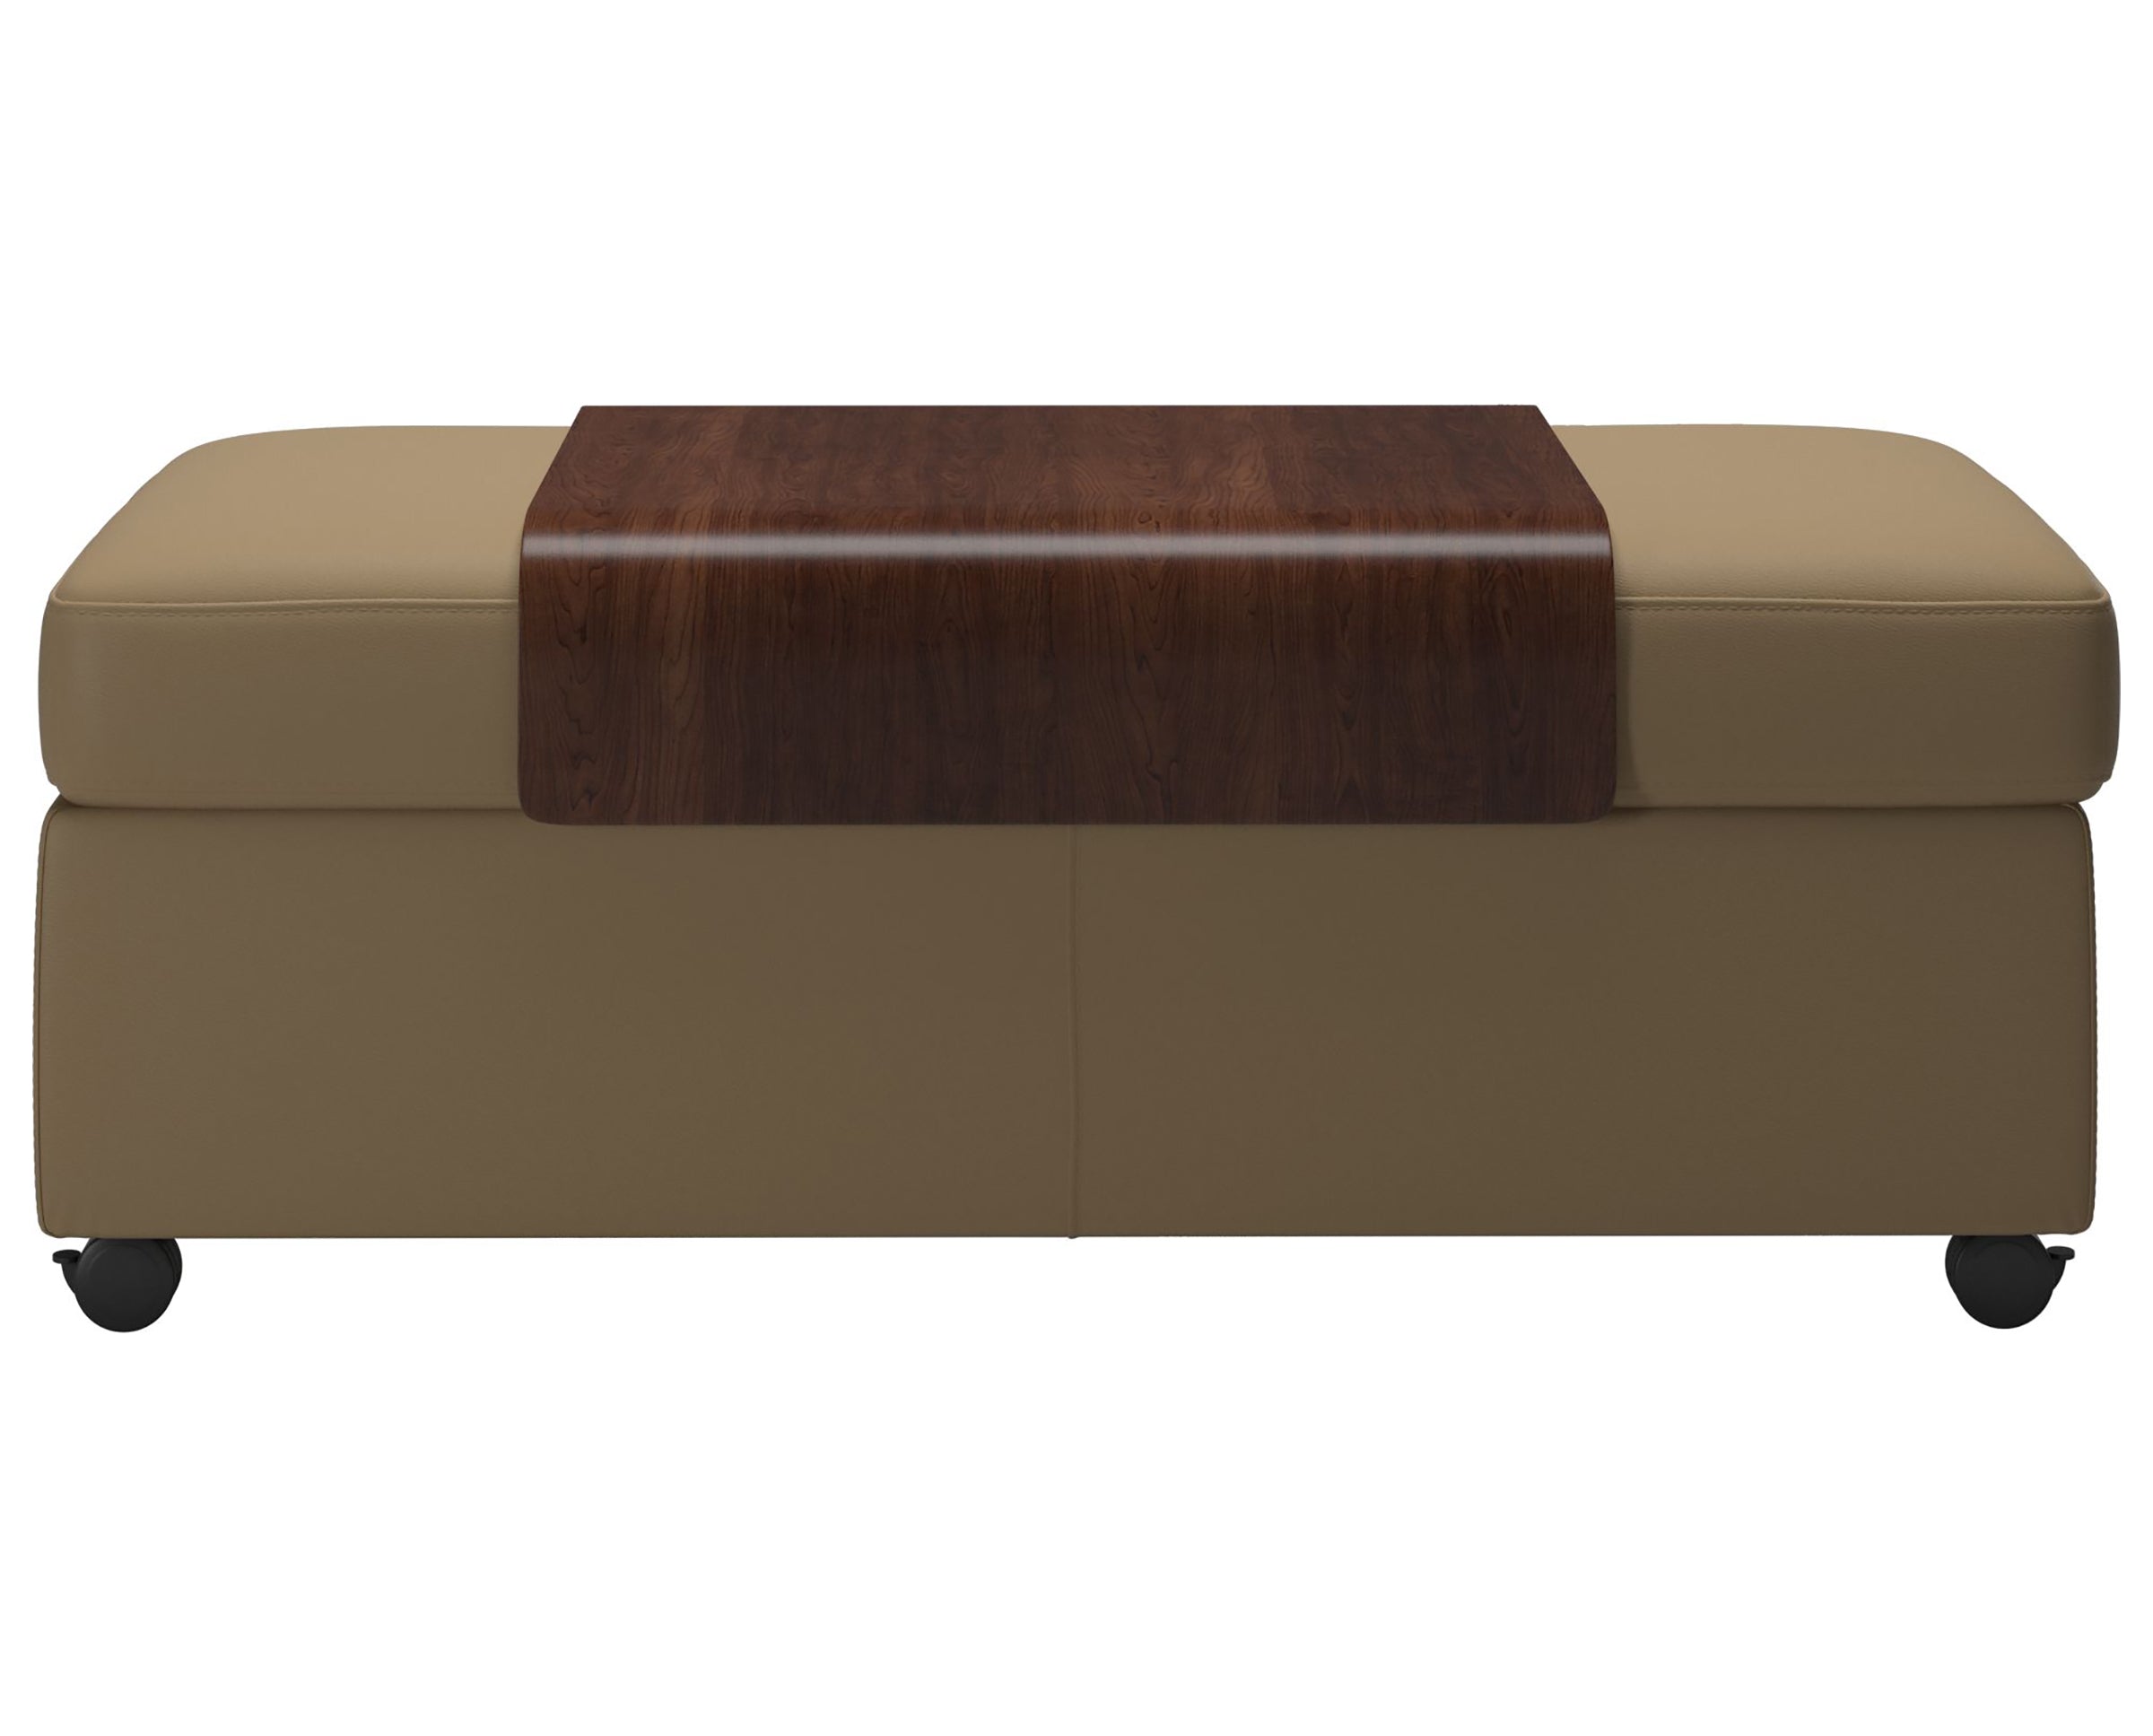 Paloma Leather Sand and Brown Finish | Stressless Double Ottoman with Table | Valley Ridge Furniture